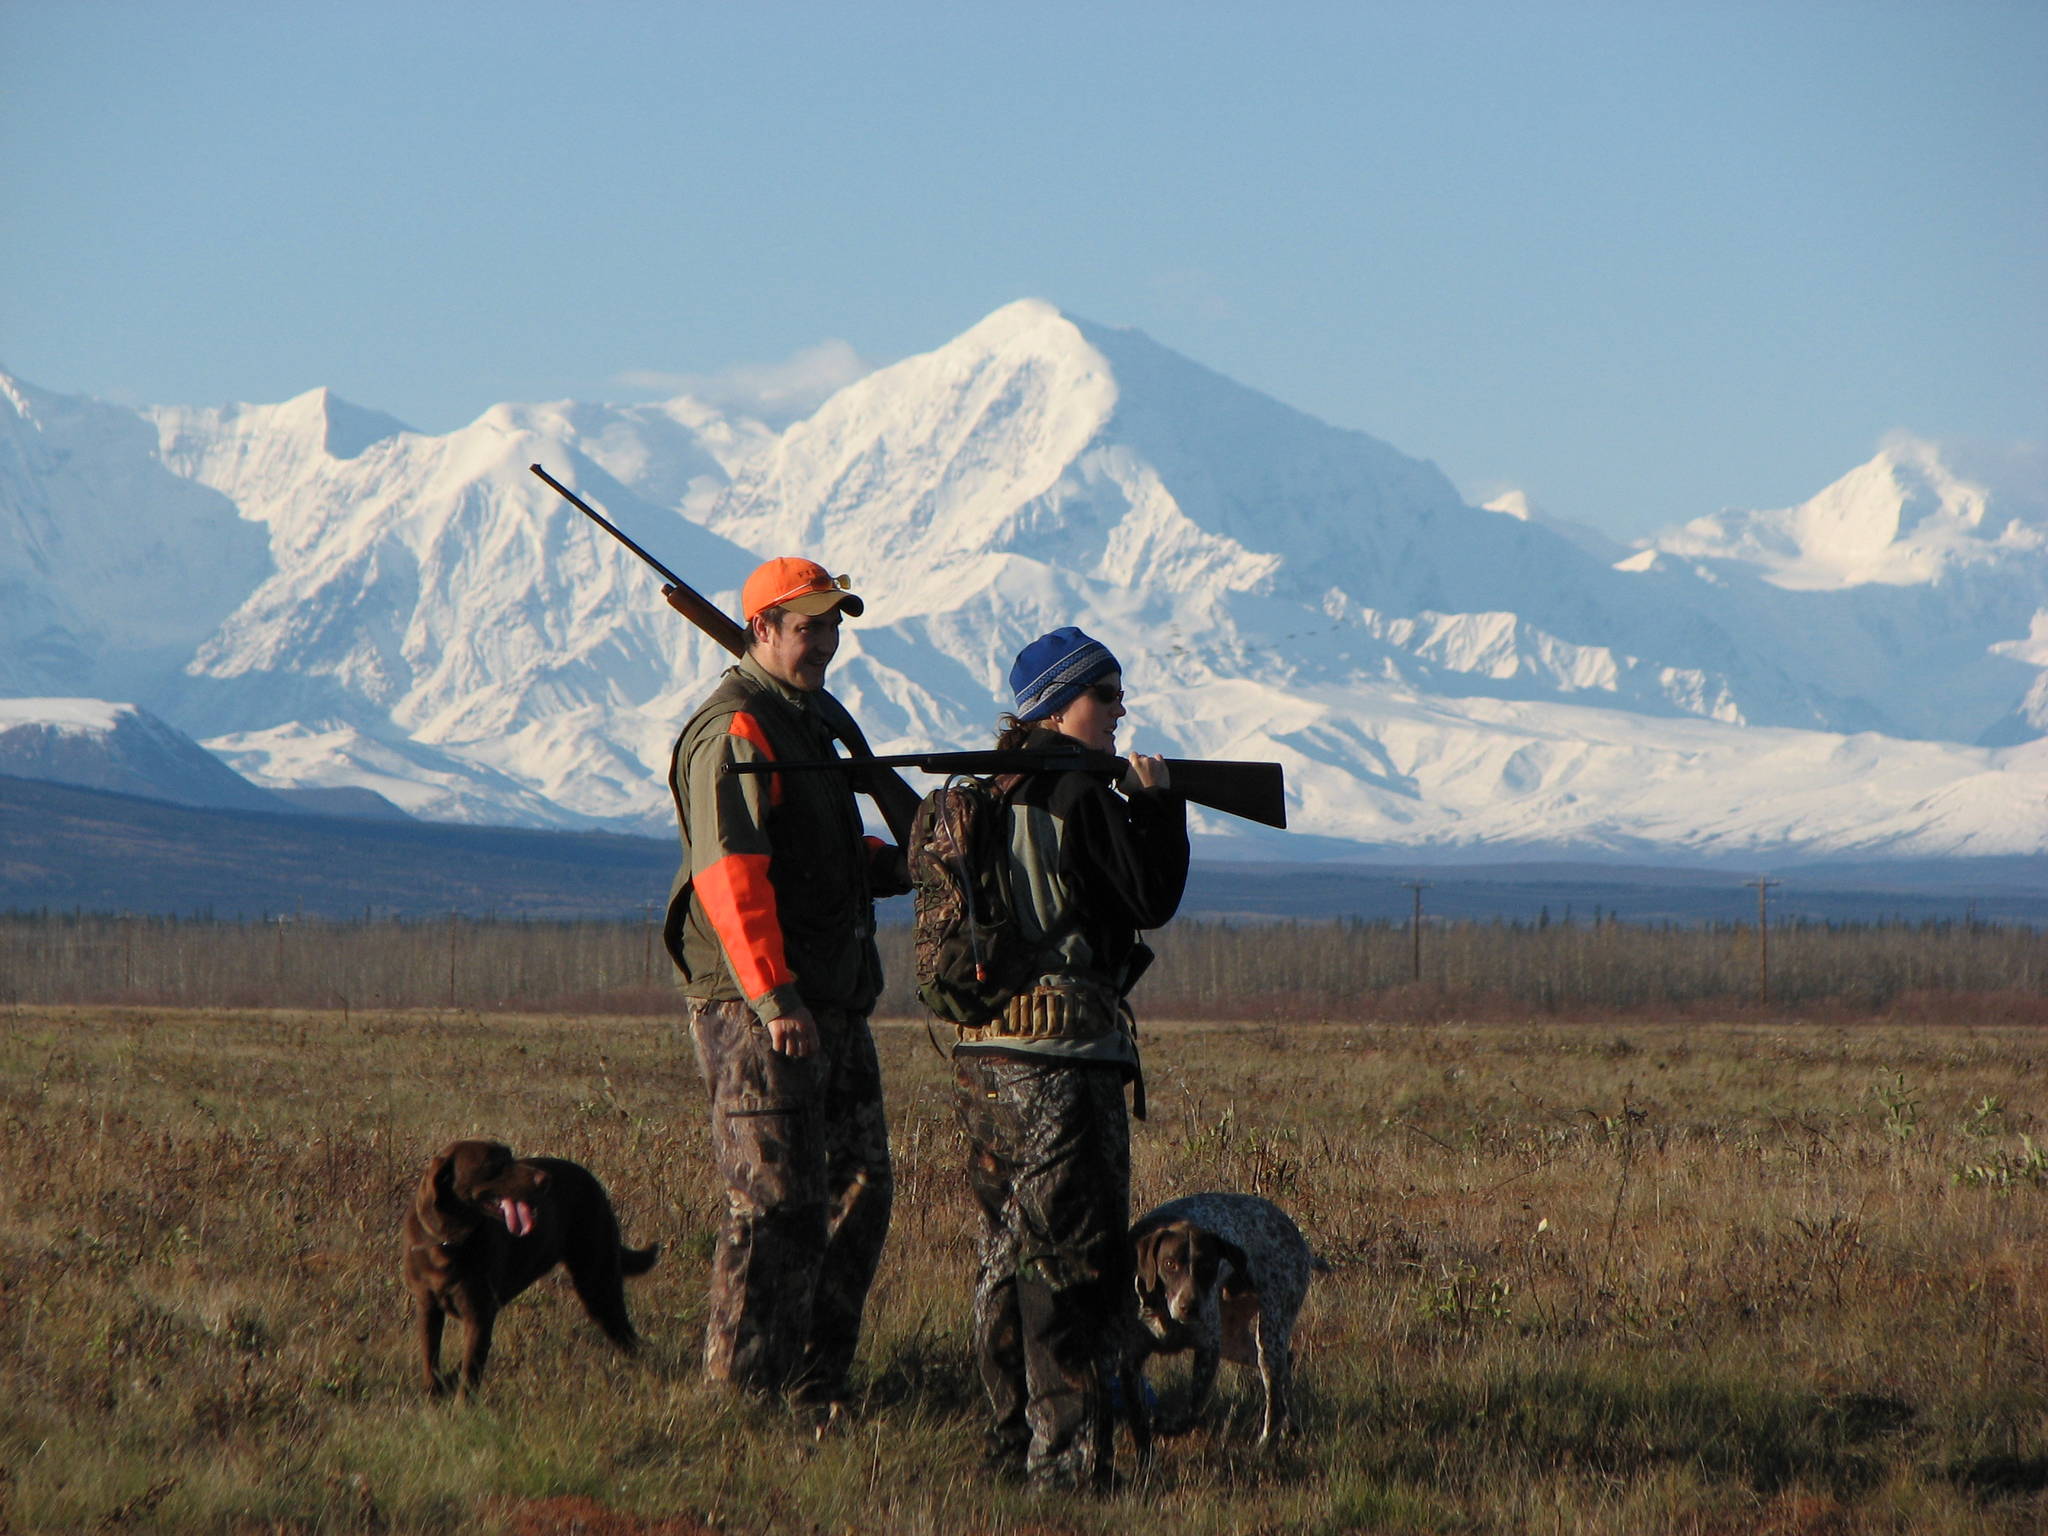 Dwarfed by the majestic and formidable Alaska Range, Michelle and Reed Quinton hunt sharptailed grouse with their dogs Bristol and Sage. (Photo courtesy Mike Chihuly)